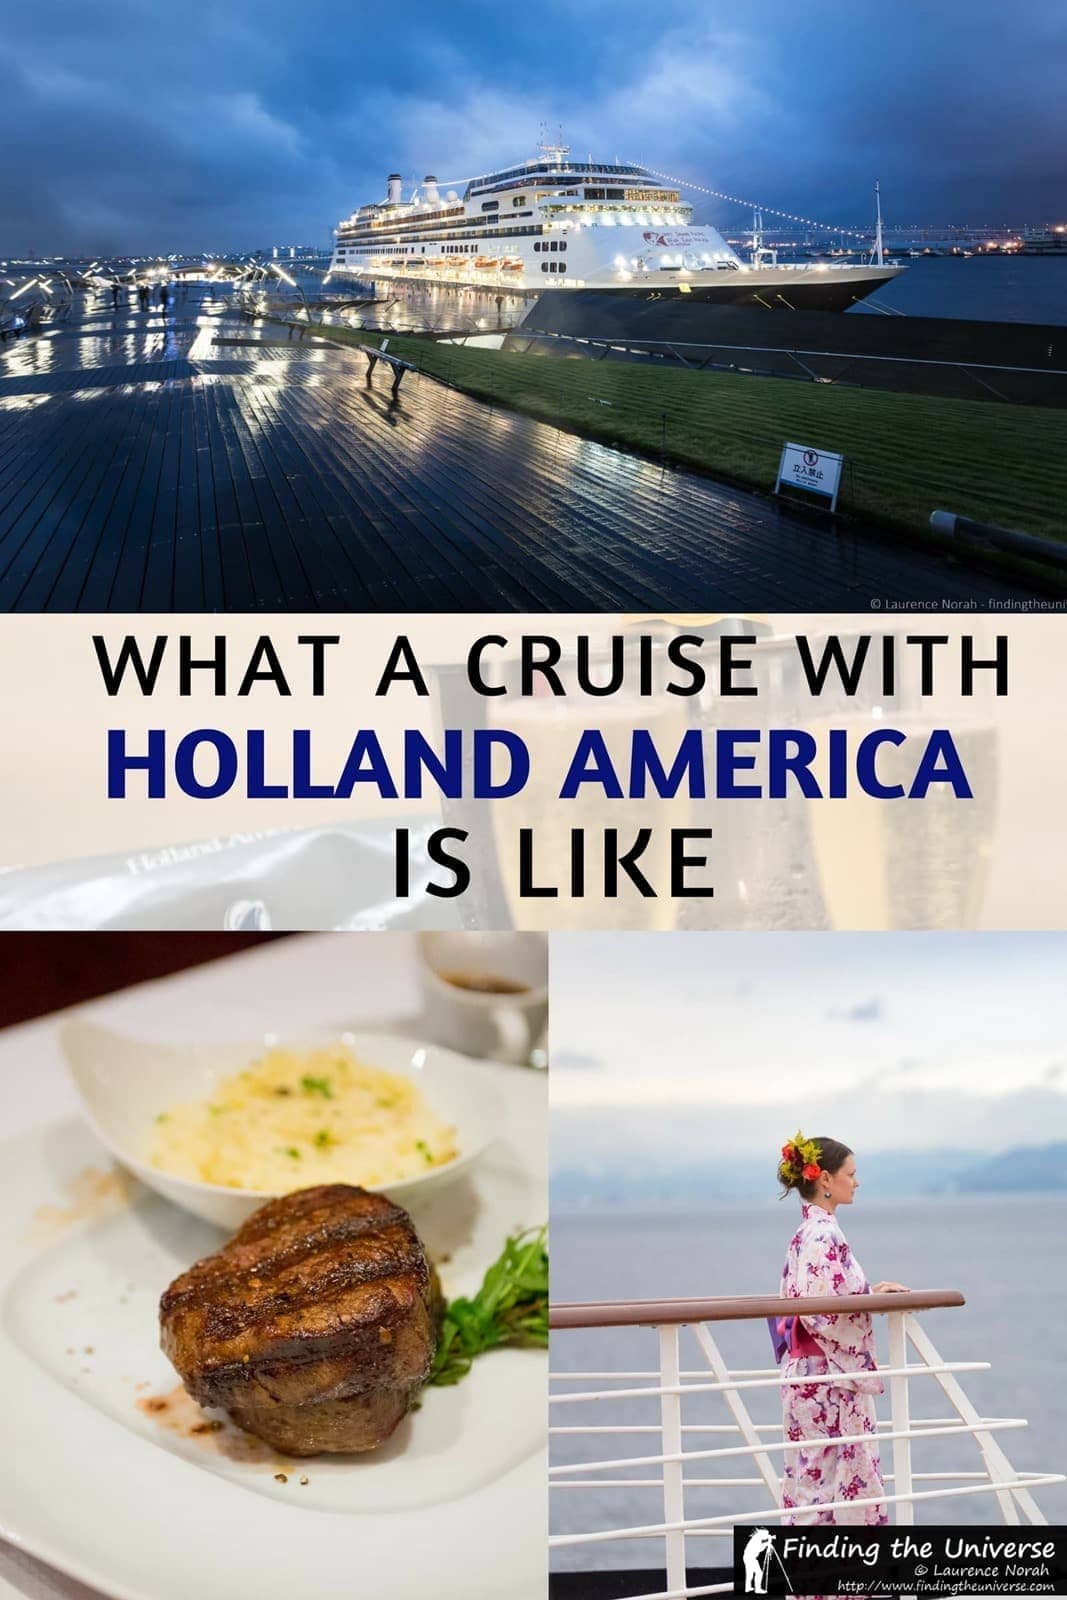 What's it like to cruise with Holland America? We give you all the details from our cruise with them, including what to expect on board, entertainment options, the food, the rooms and the shore excursions!